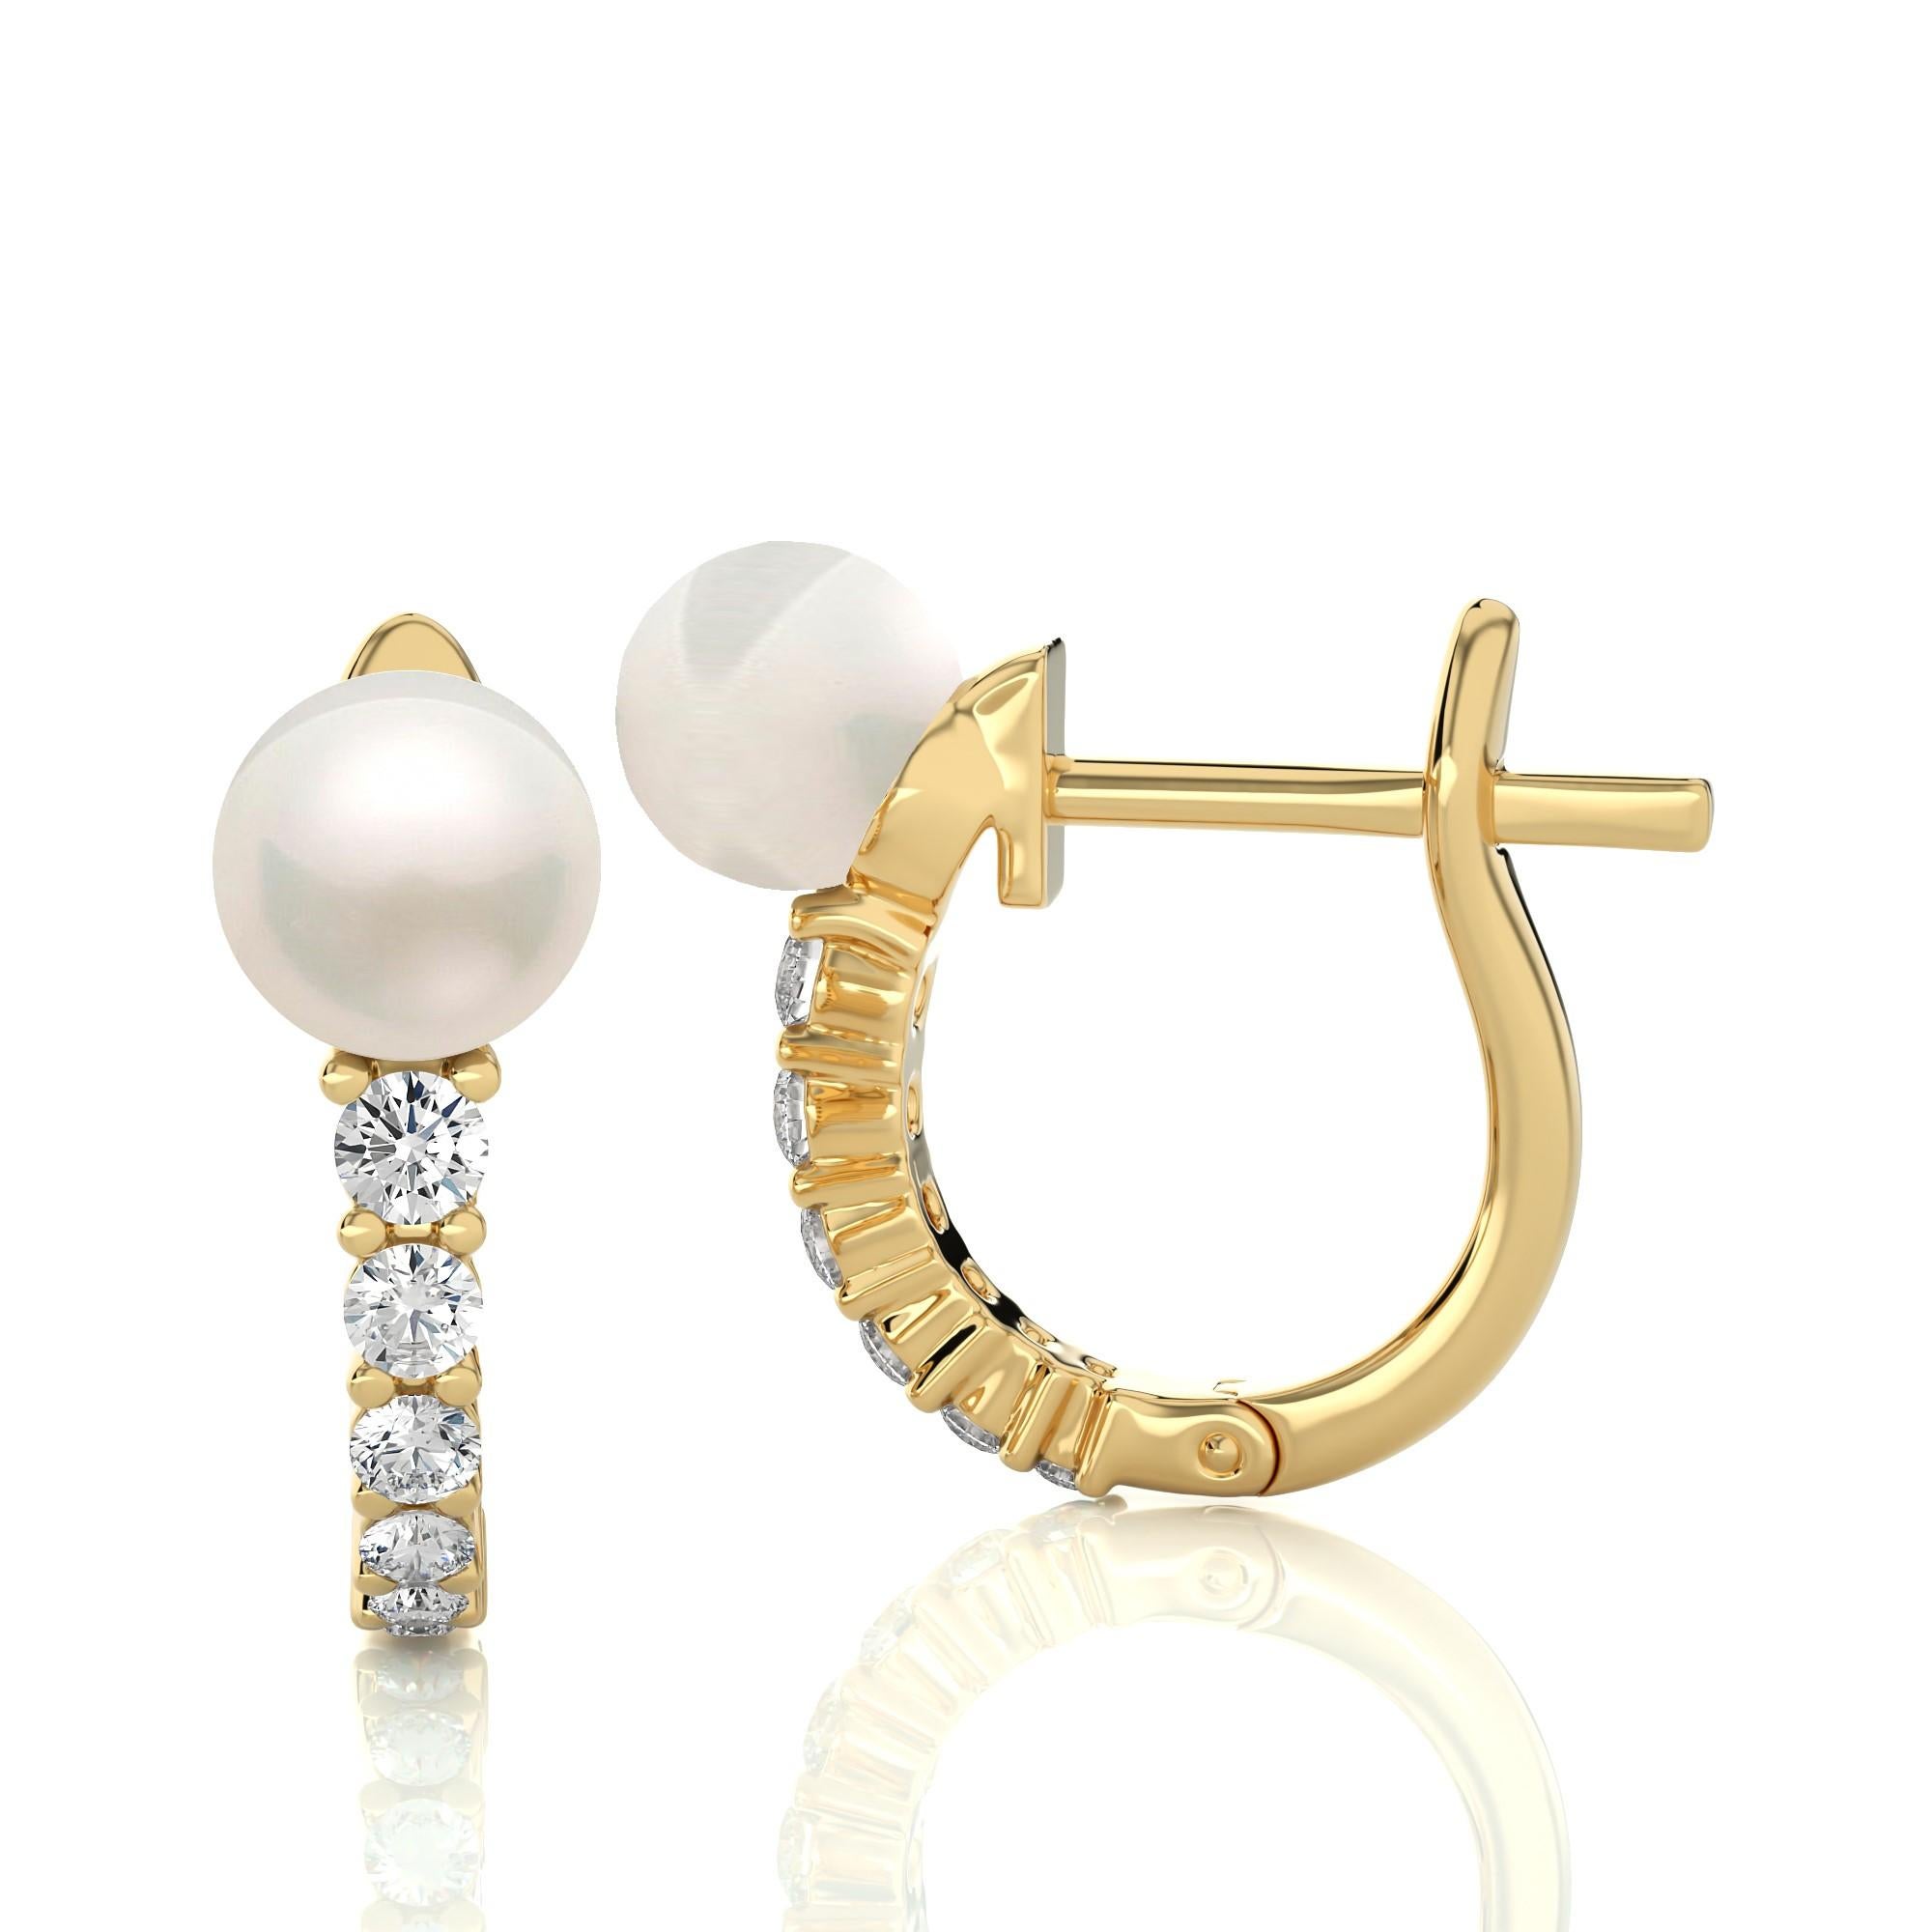 Modern Diamond And Pearl Huggie Earrings.

Unveiling the allure of these remarkable Diamond And Pearl Huggie earrings, adorned with authentic Natural Earth-Mined Diamonds. The set features a row of diamonds, securely cradled in a classic 4-prong